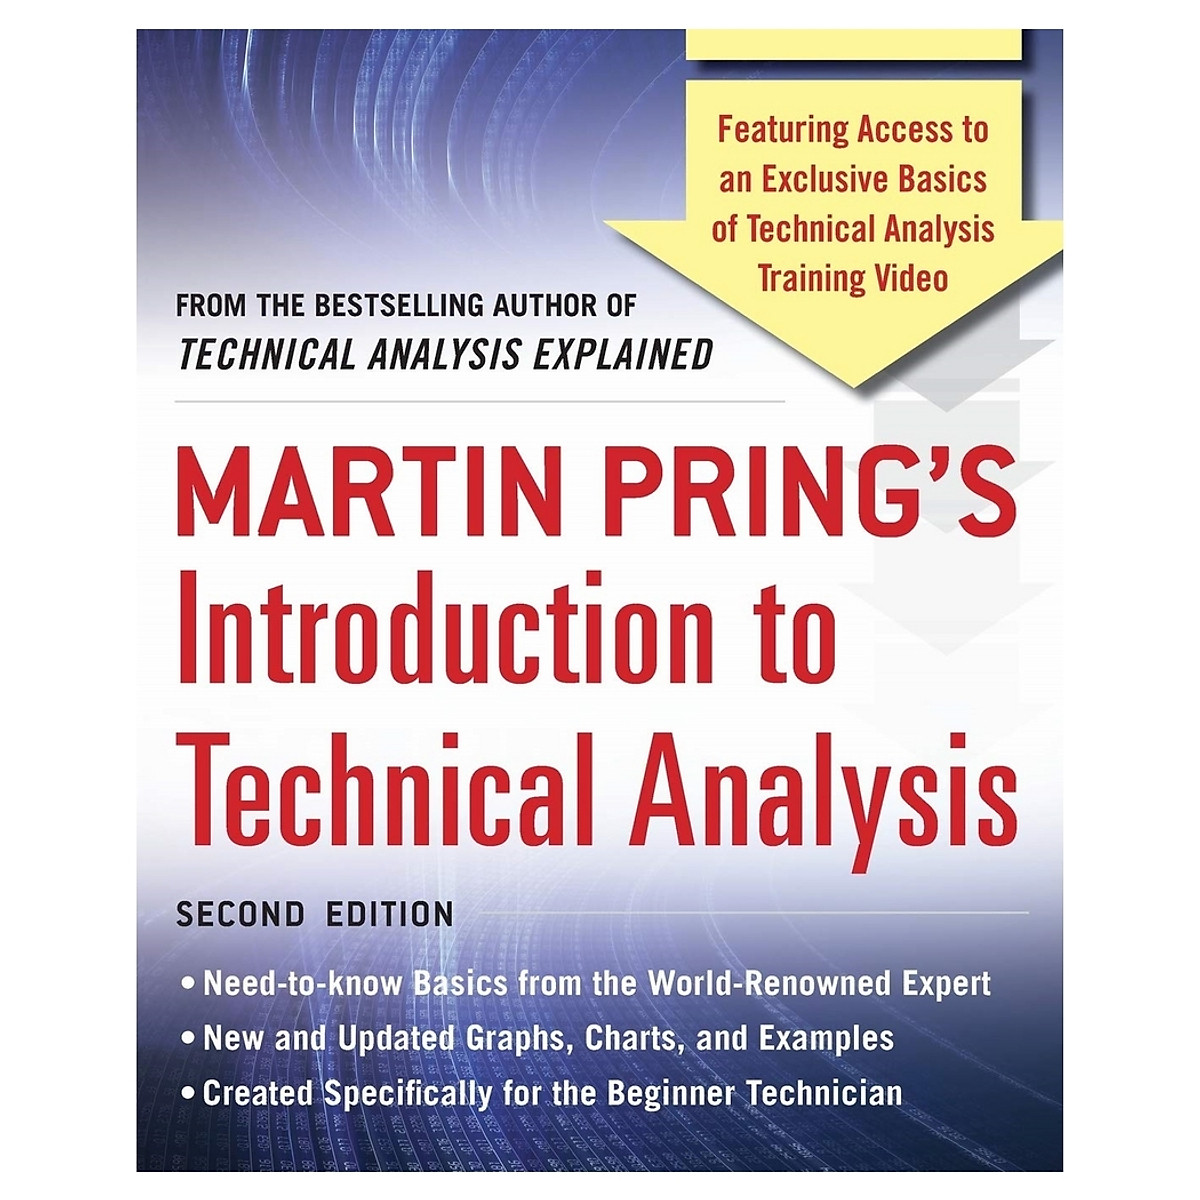 Martin Pring's Introduction To Technical Analysis